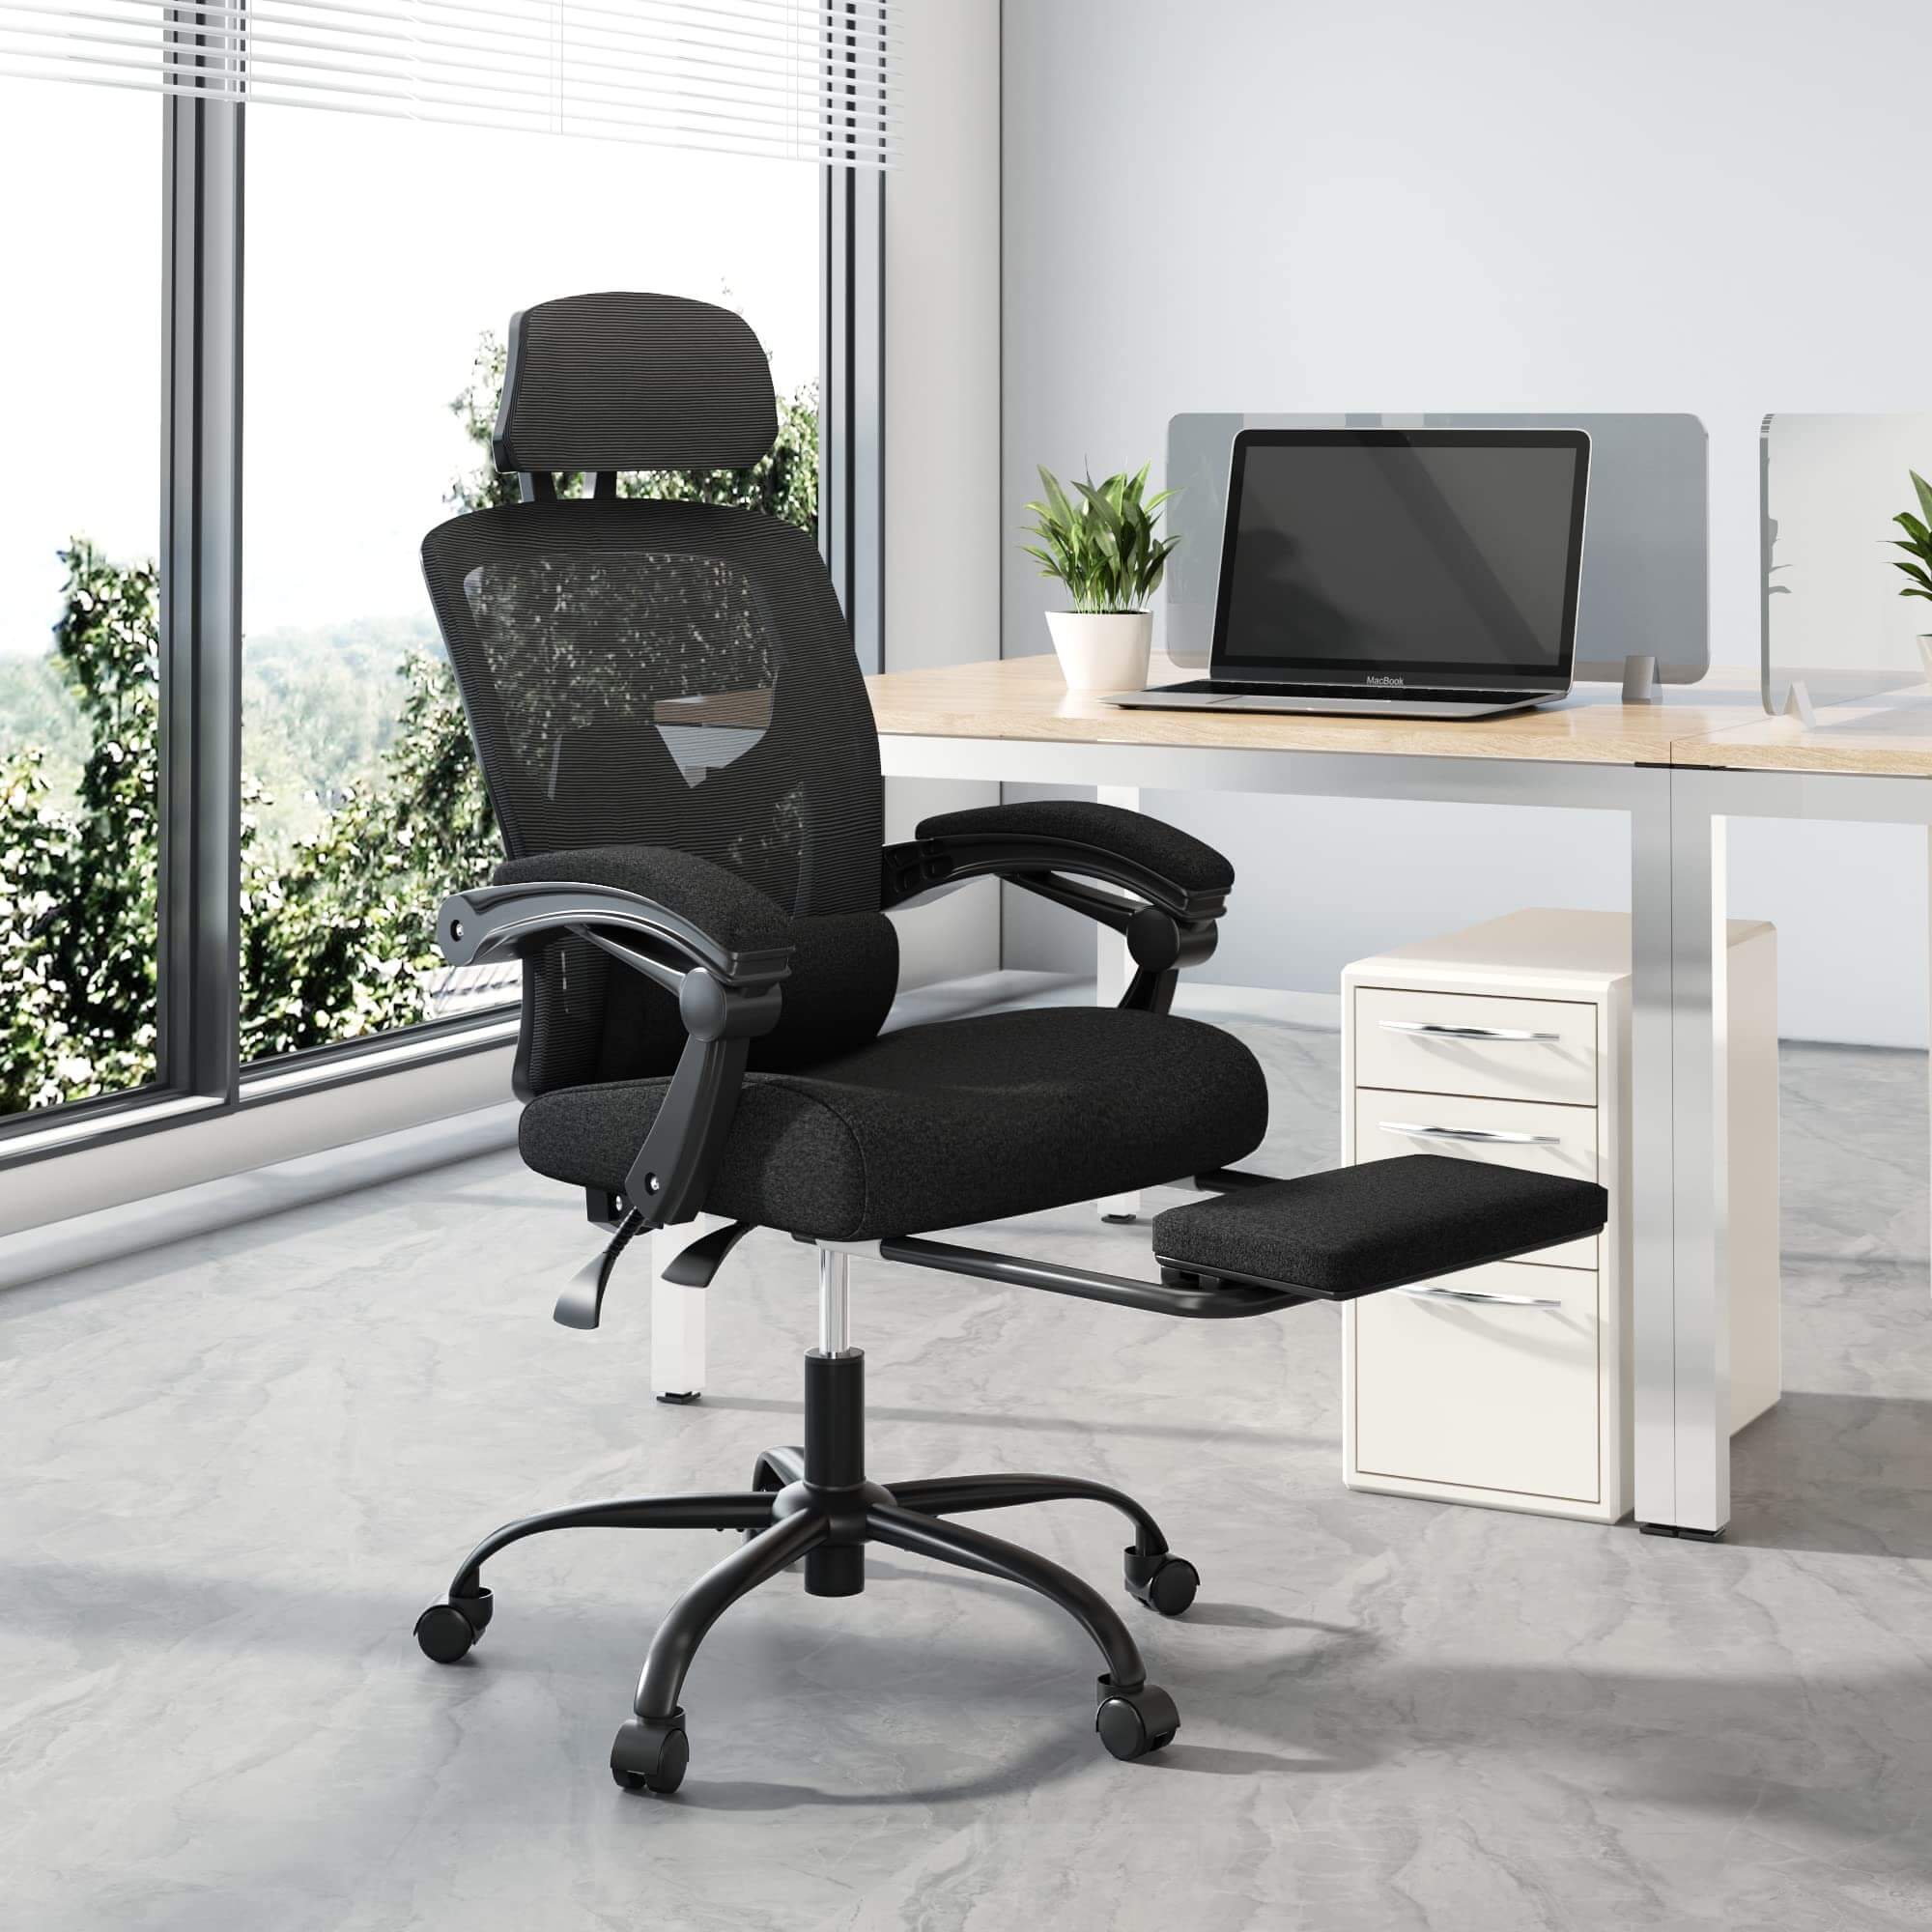 Limited Edition Discount Qulomvs Mesh Ergonomic Office Chair with Footrest  Home Office Desk Chair with Headrest and Backrest 90-135 Adjustable Computer  Executive Desk Chair, ergonomic office